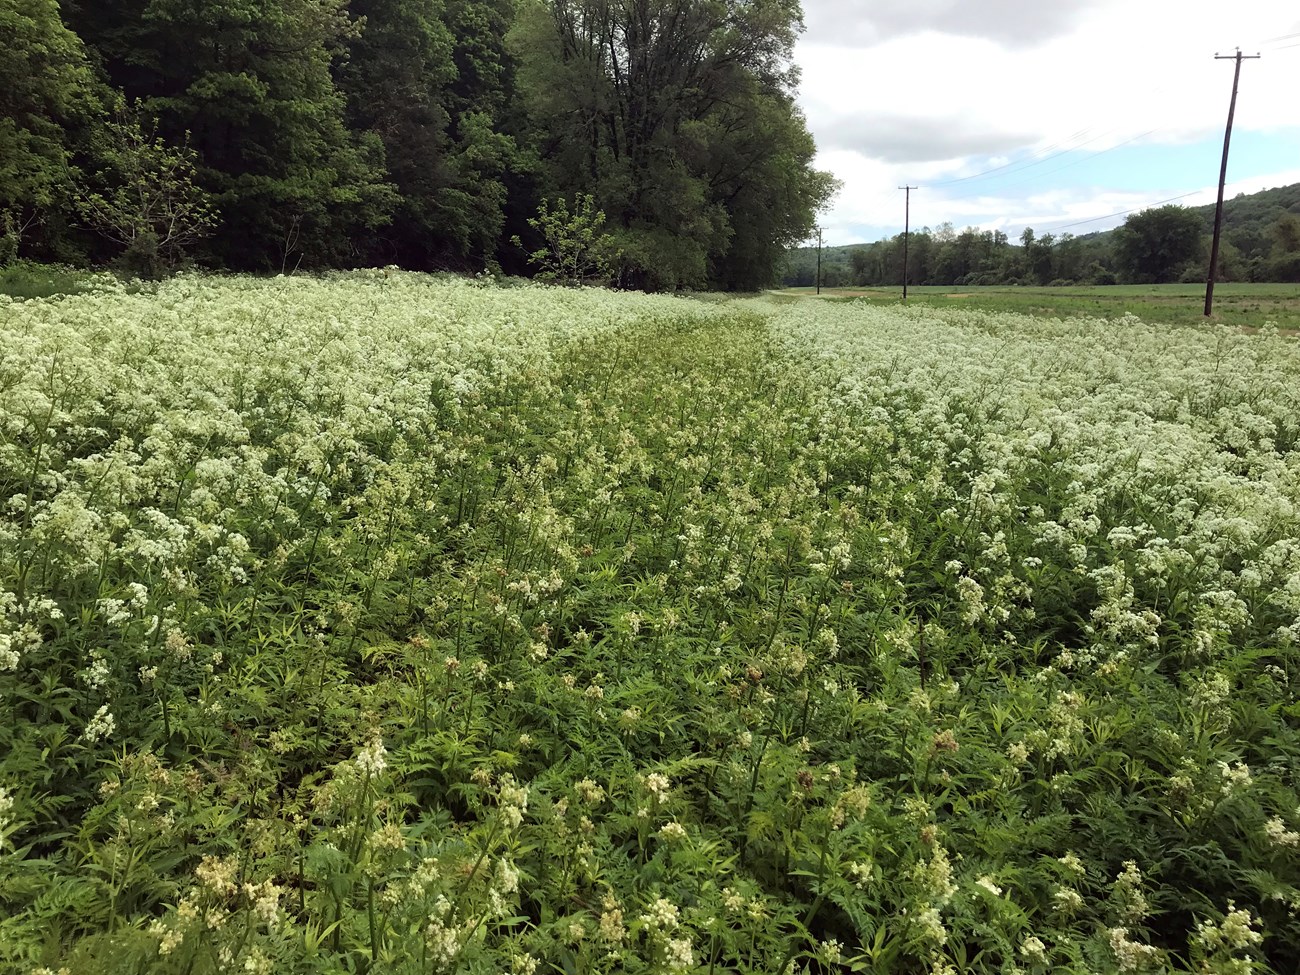 Cow parsley (Anthriscus sylvestris) forming a monocrop in Delaware Water Gap National Recreation Area. NPS Photo.